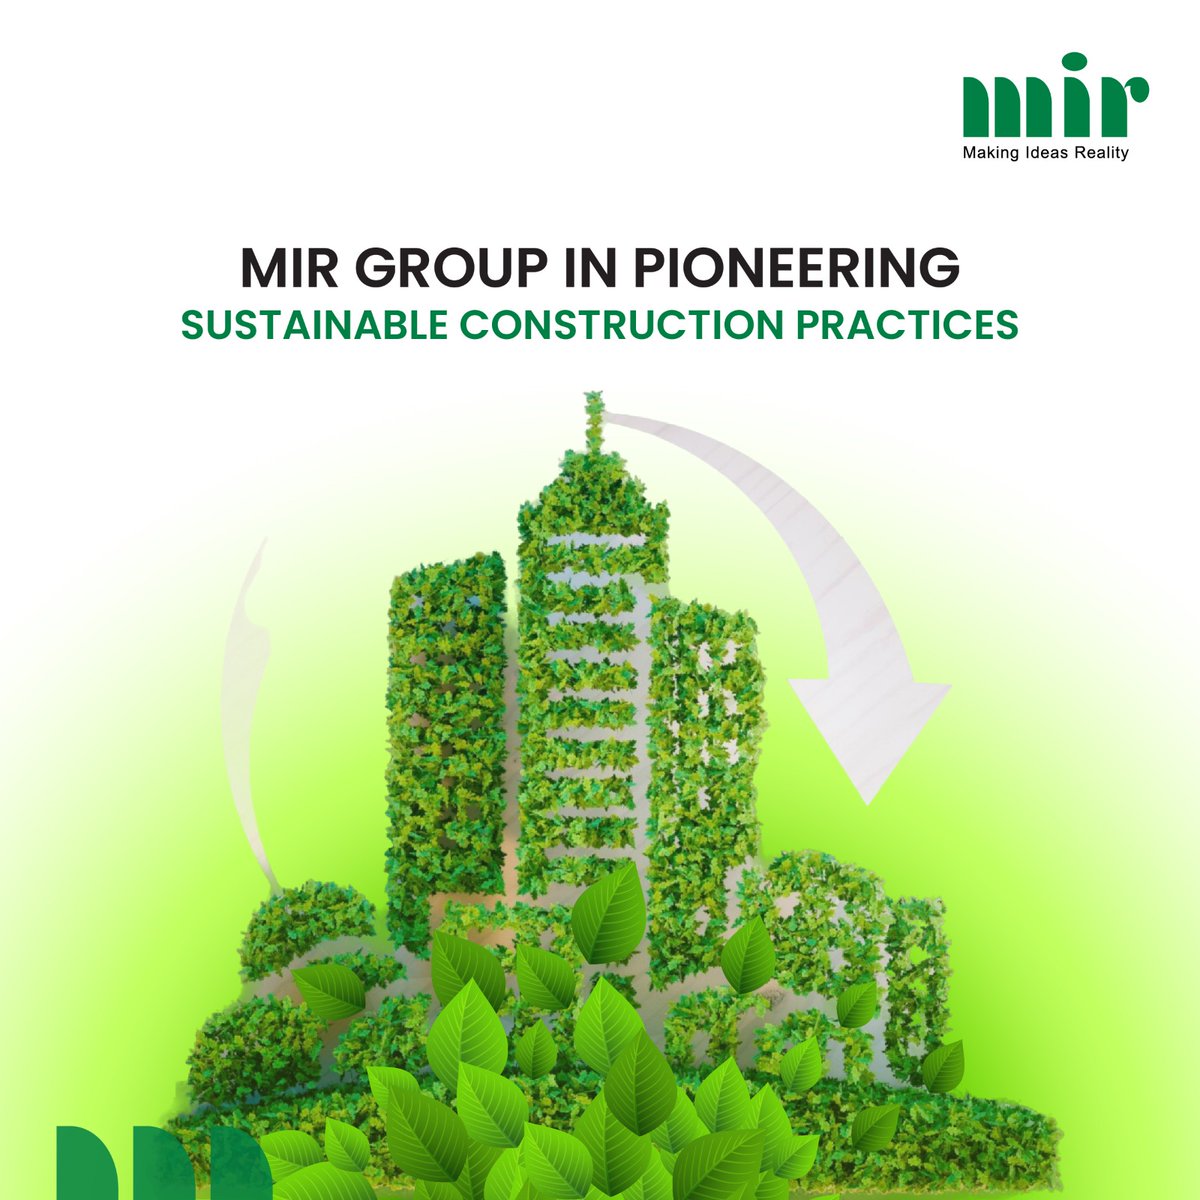 Mir Group is building a sustainable future through reliable, durable, and beneficial construction practices for businesses of all kinds.

mirgroupbd.com

#mir #mirgroup #MakingIdeasReality
#BuildingForTheFuture #DreamsToReality
#BrighterFuture #Bangladesh